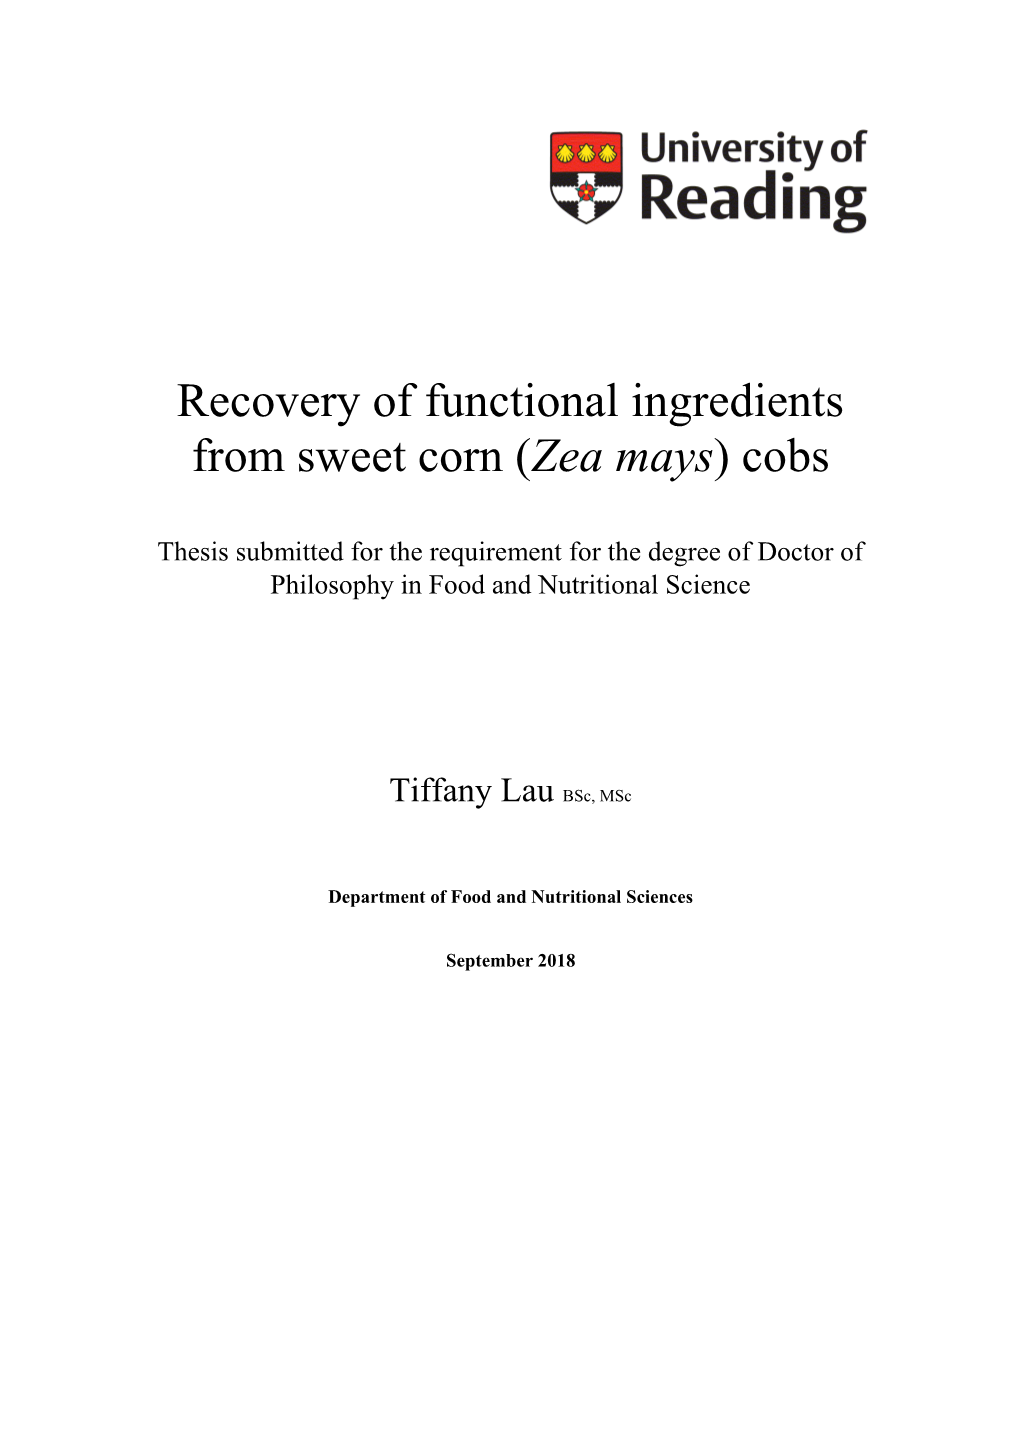 Recovery of Functional Ingredients from Sweet Corn (Zea Mays) Cobs